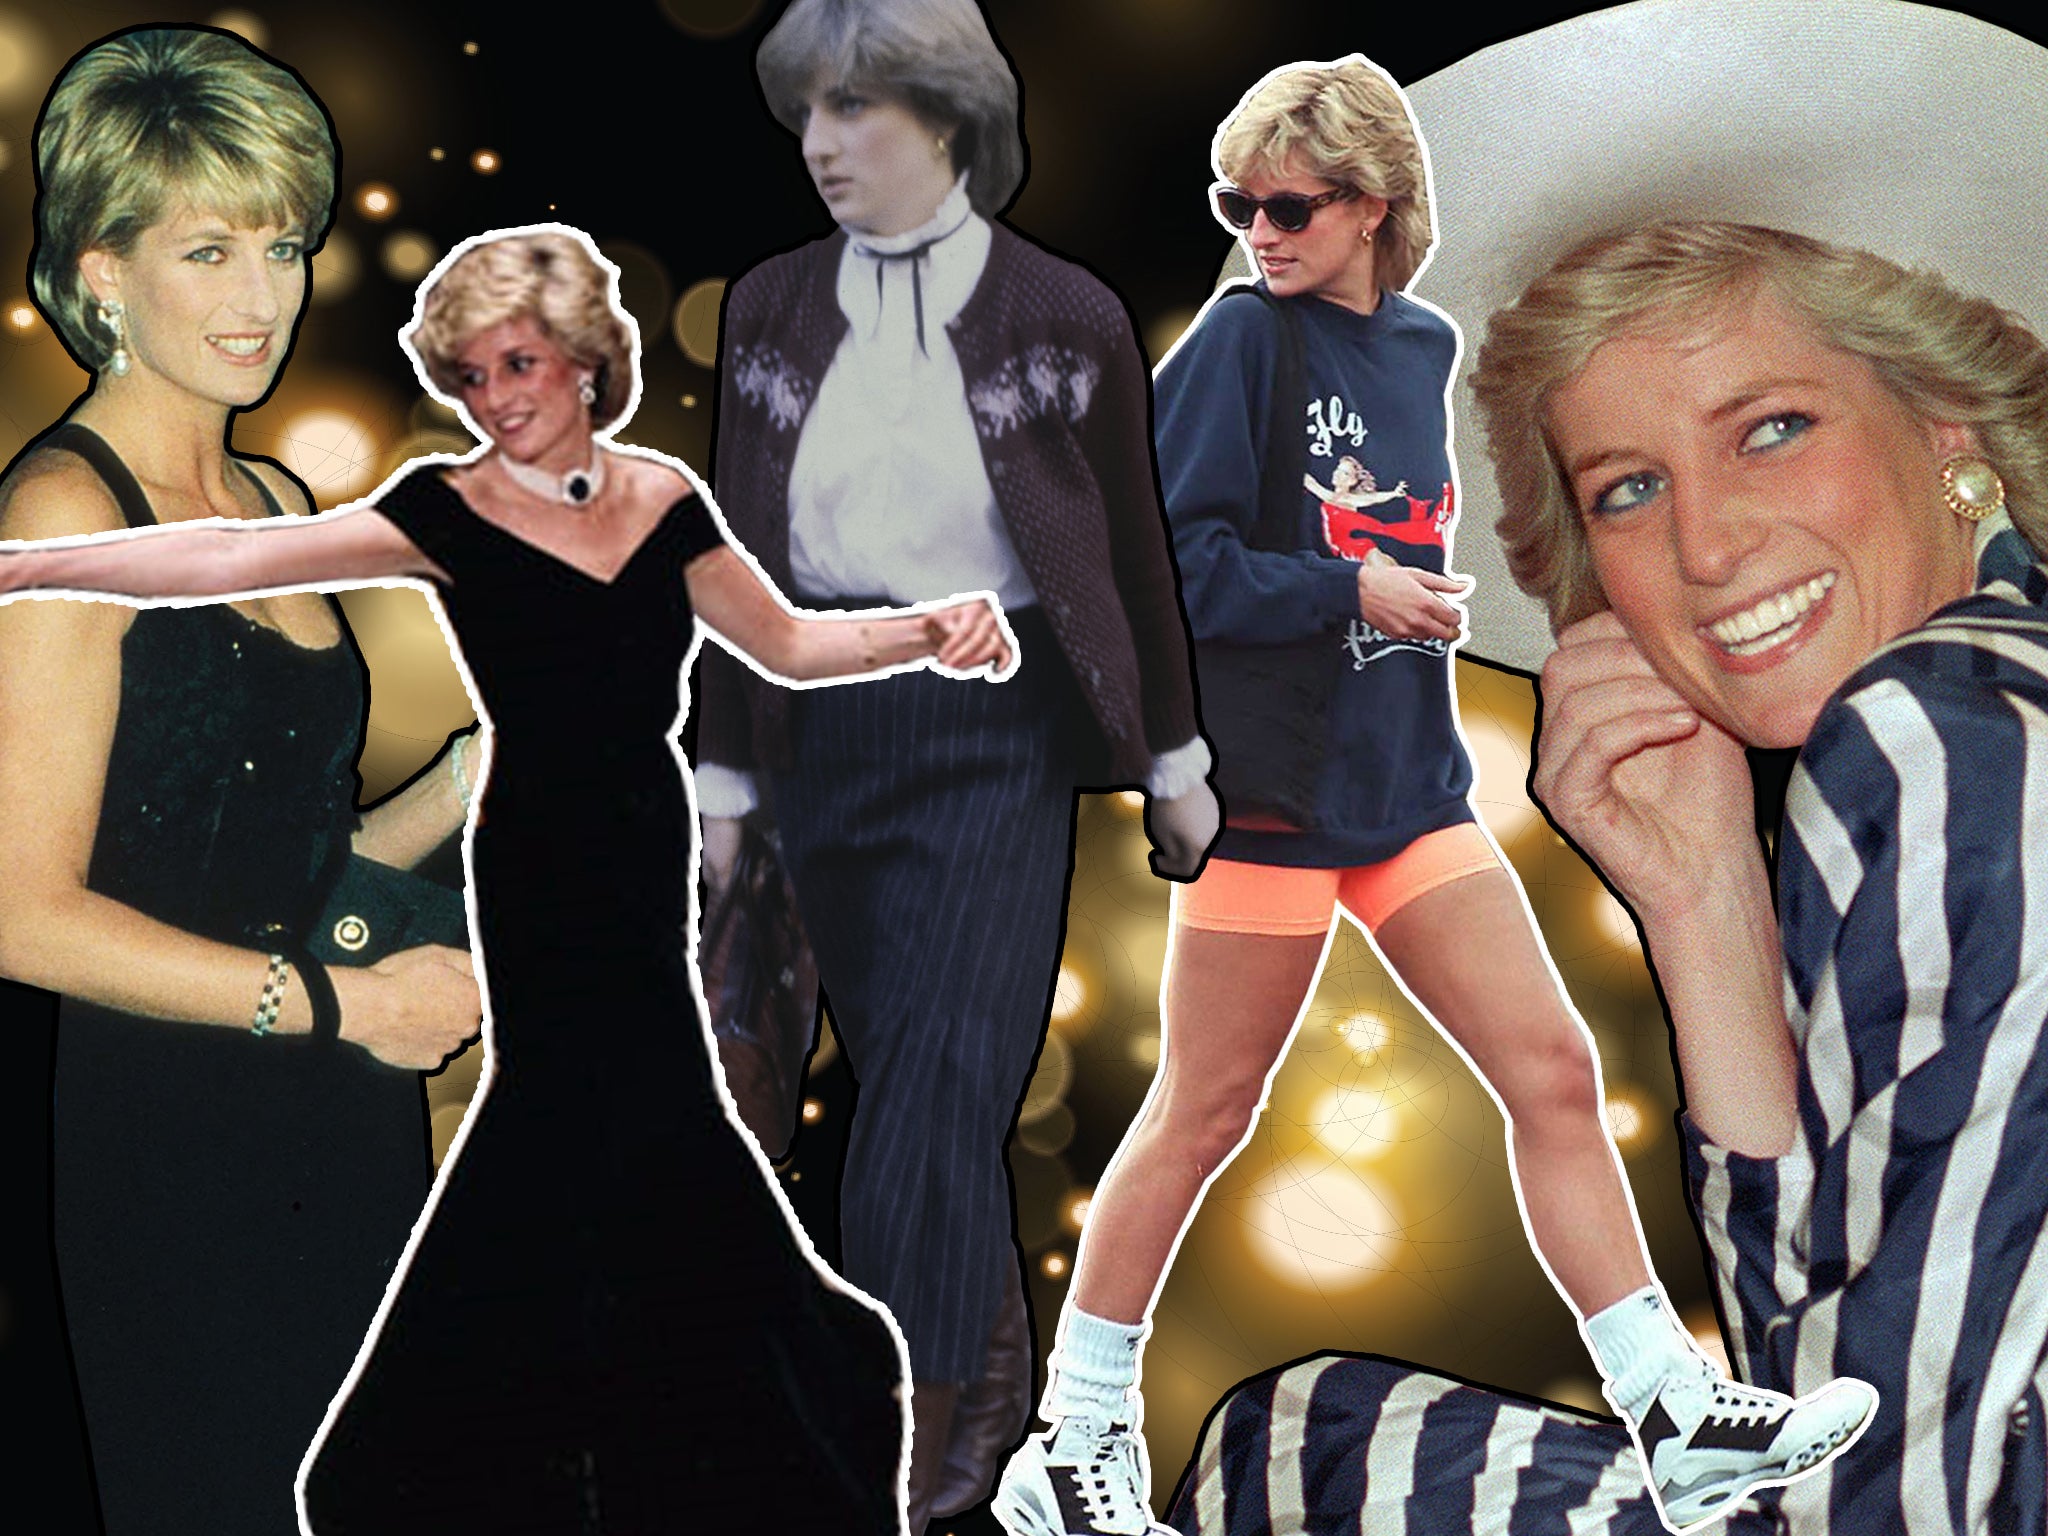 Princess Diana Fashion Charting Her Style Evolution On What Would Have Been Her 60th Birthday